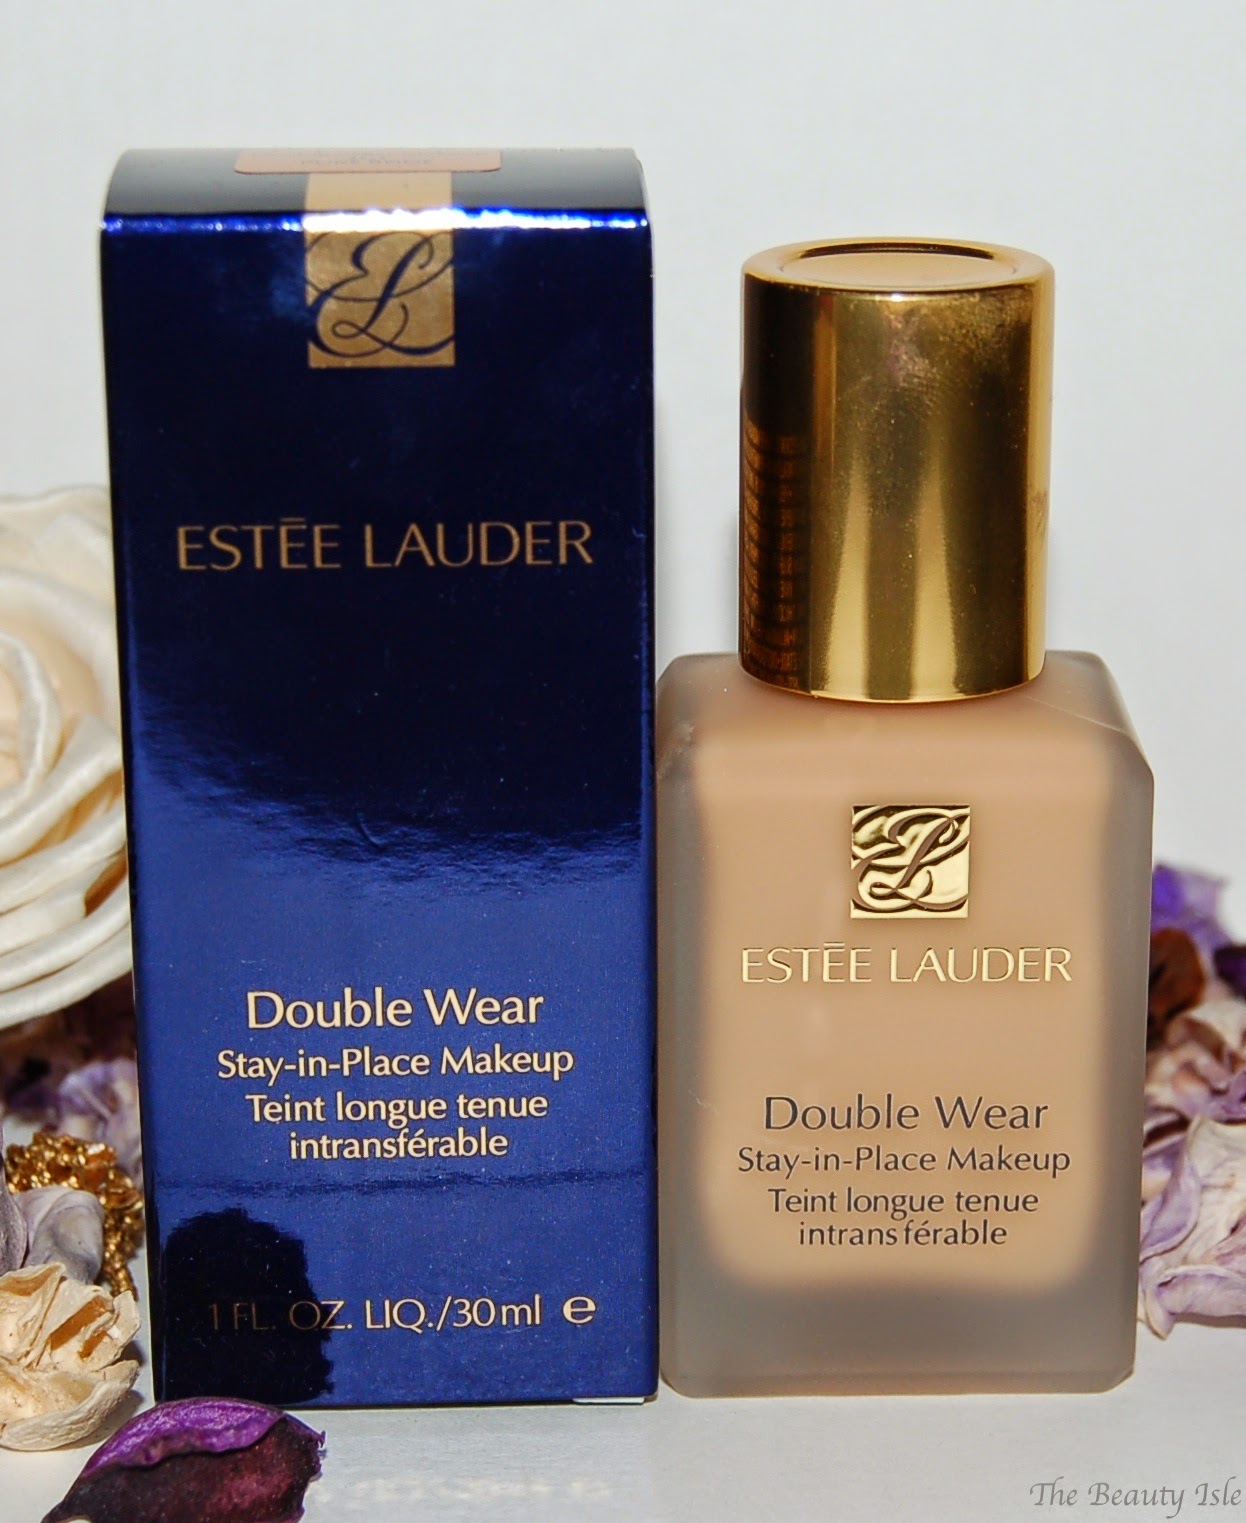 Should I buy the Estee Lauder Double Wear foundation or 